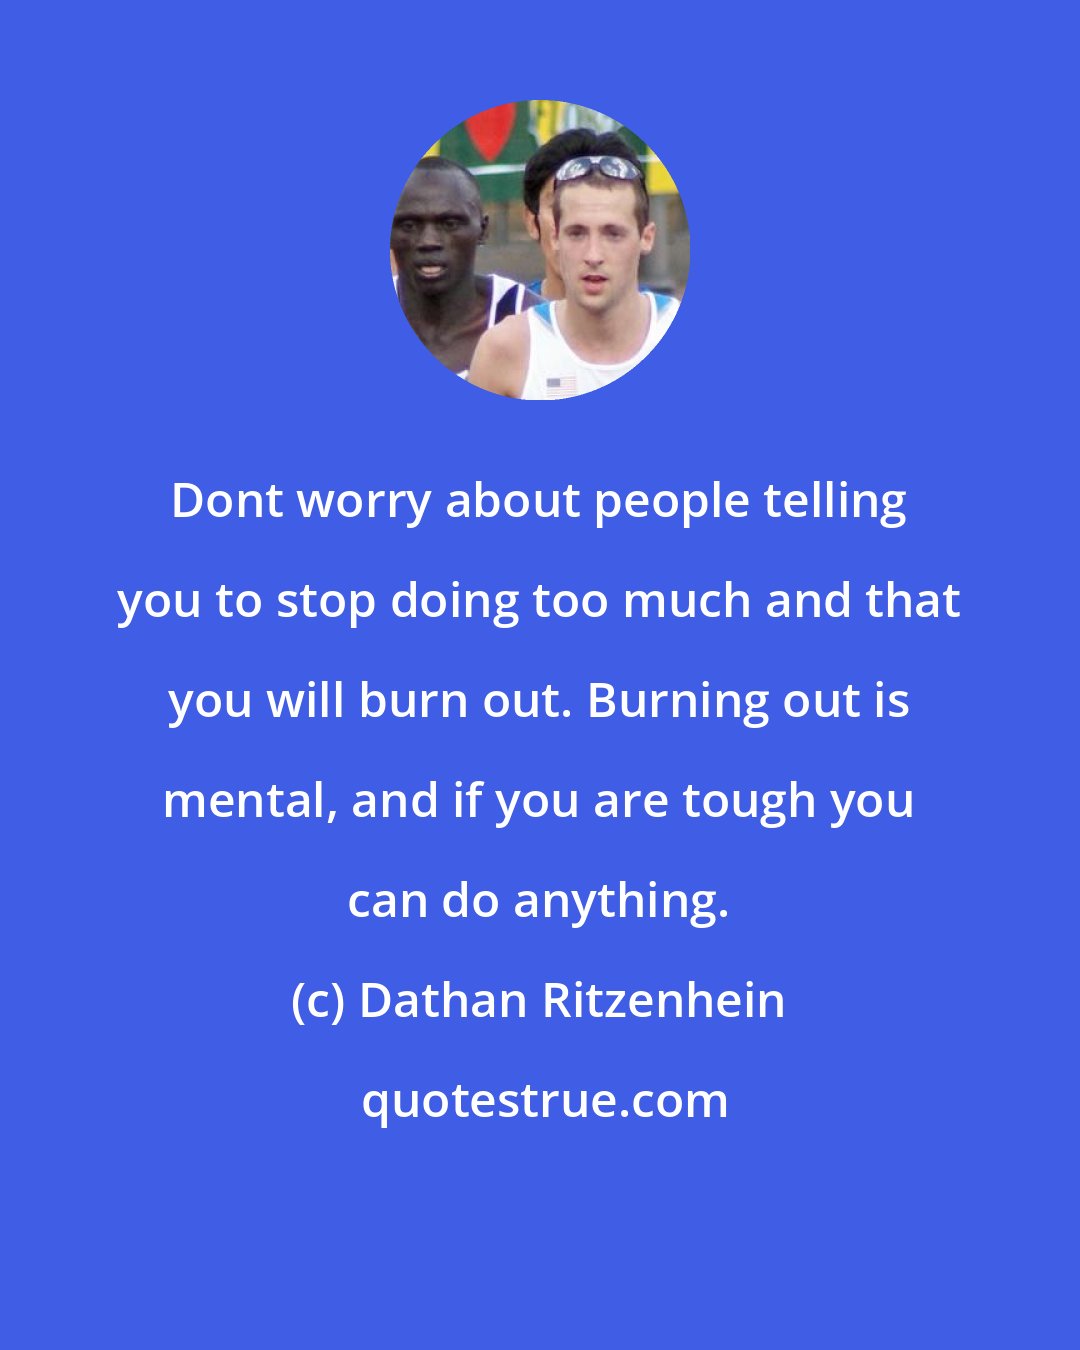 Dathan Ritzenhein: Dont worry about people telling you to stop doing too much and that you will burn out. Burning out is mental, and if you are tough you can do anything.